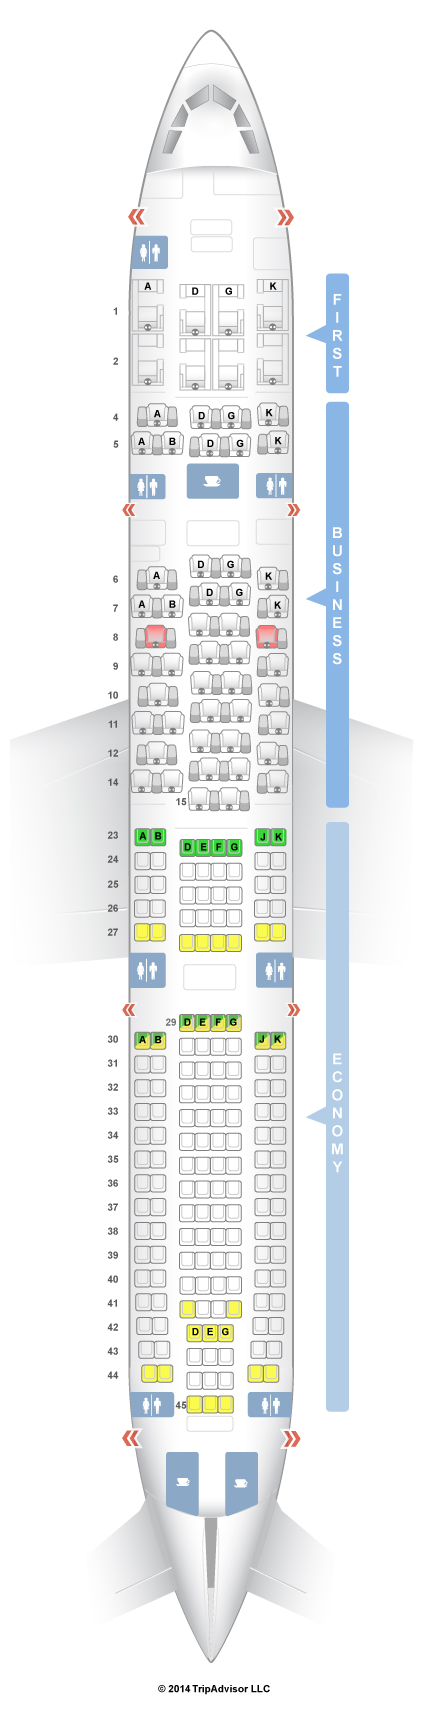 swiss airlines seat assignment